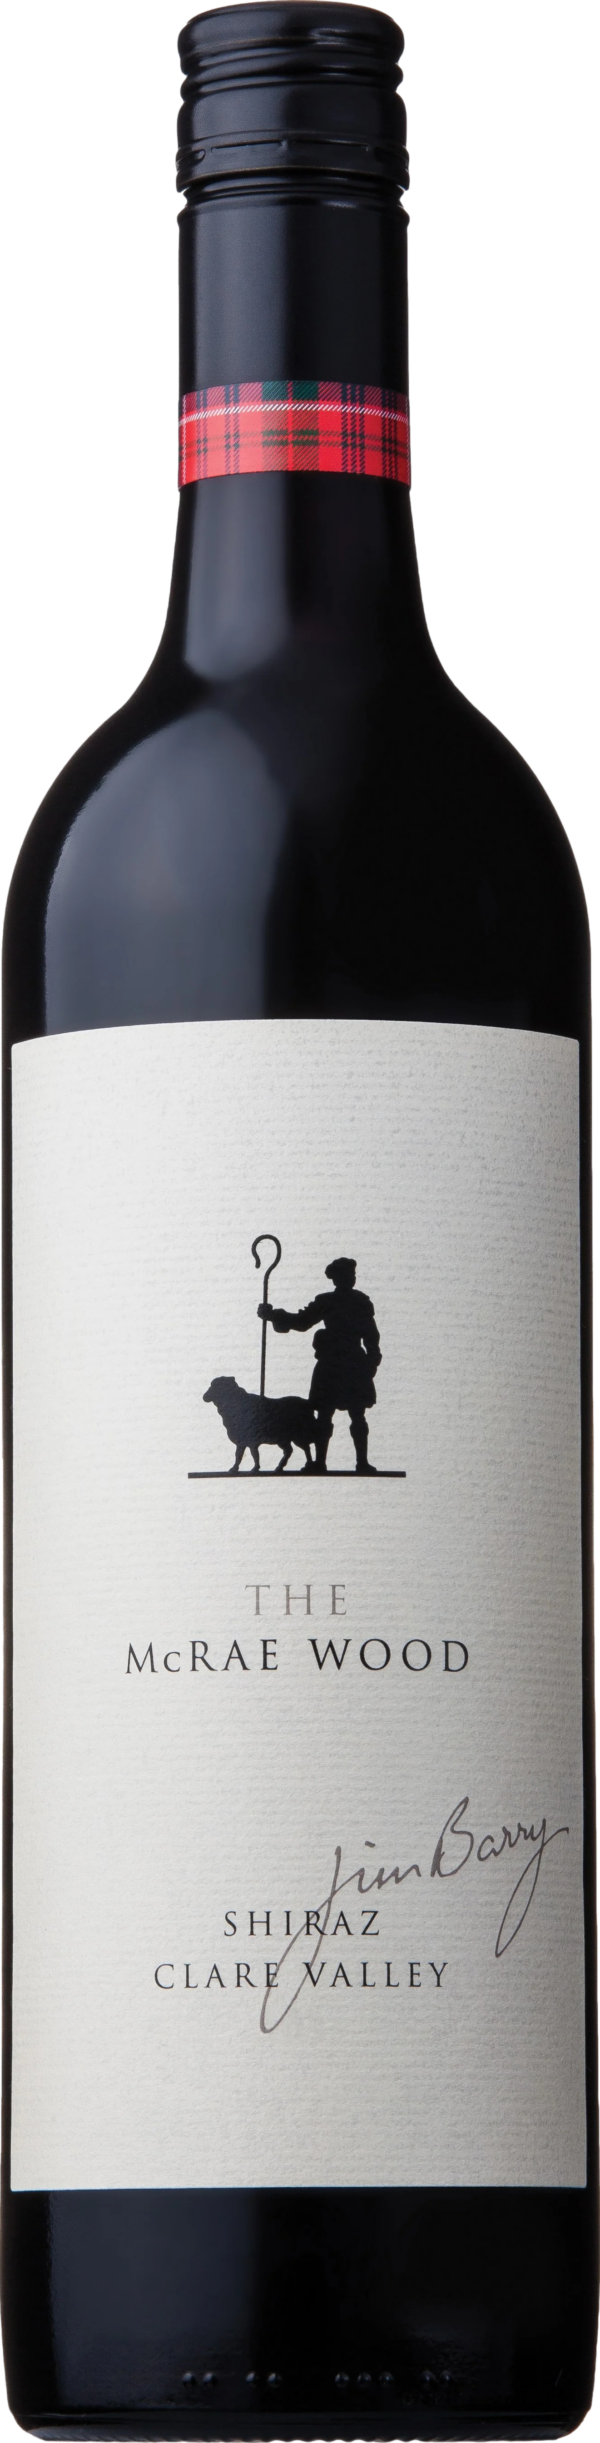 Product image of Jim Barry The McRae Wood Shiraz 2018 from 8wines